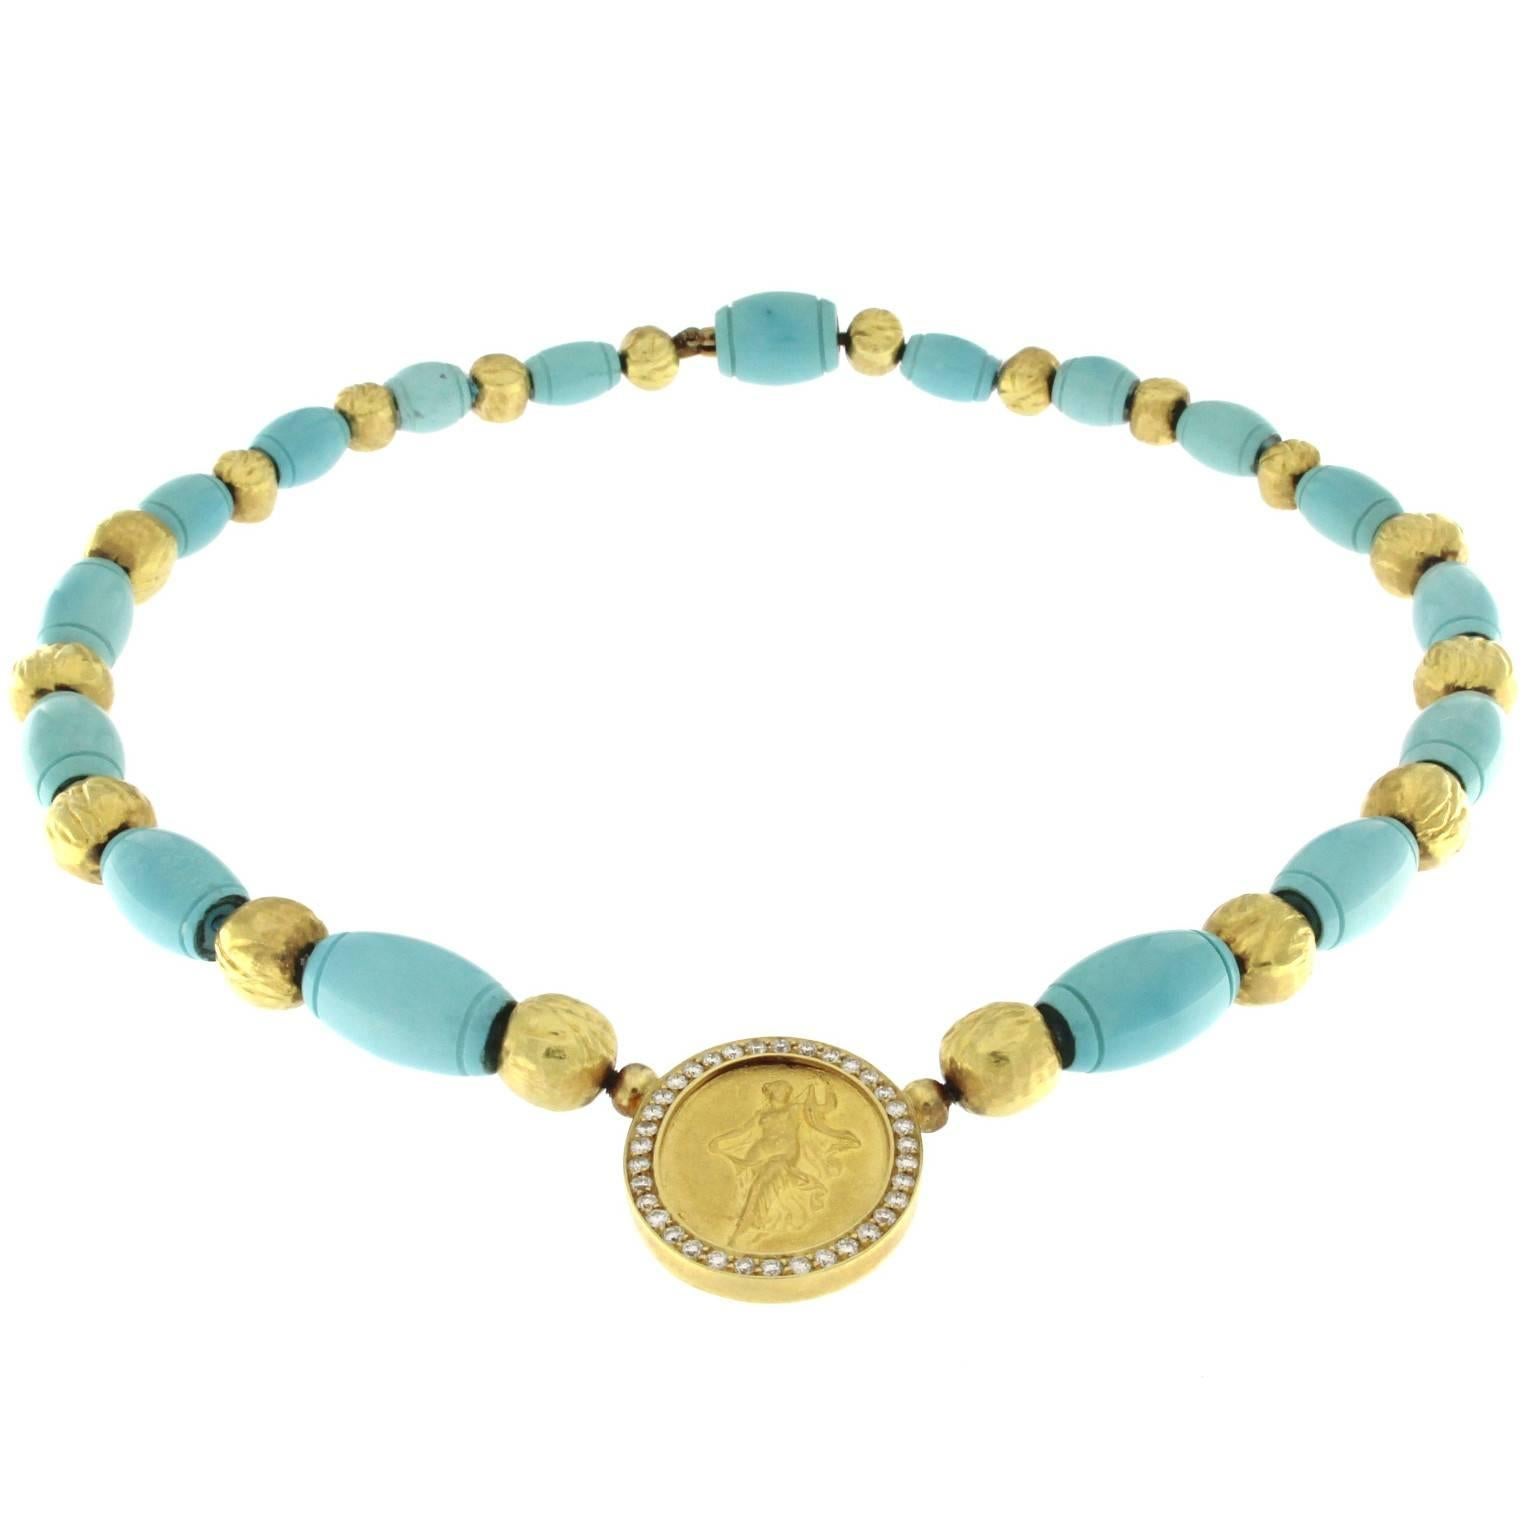 24 kt gold lily necklace and turquoise paste
Precious nugget processing on the interlayers that intersperse the degradé elements made of turquoise paste
The centre depicts a beautiful nymphaeum surrounded by a pavè of diamonds that enhances it
Total